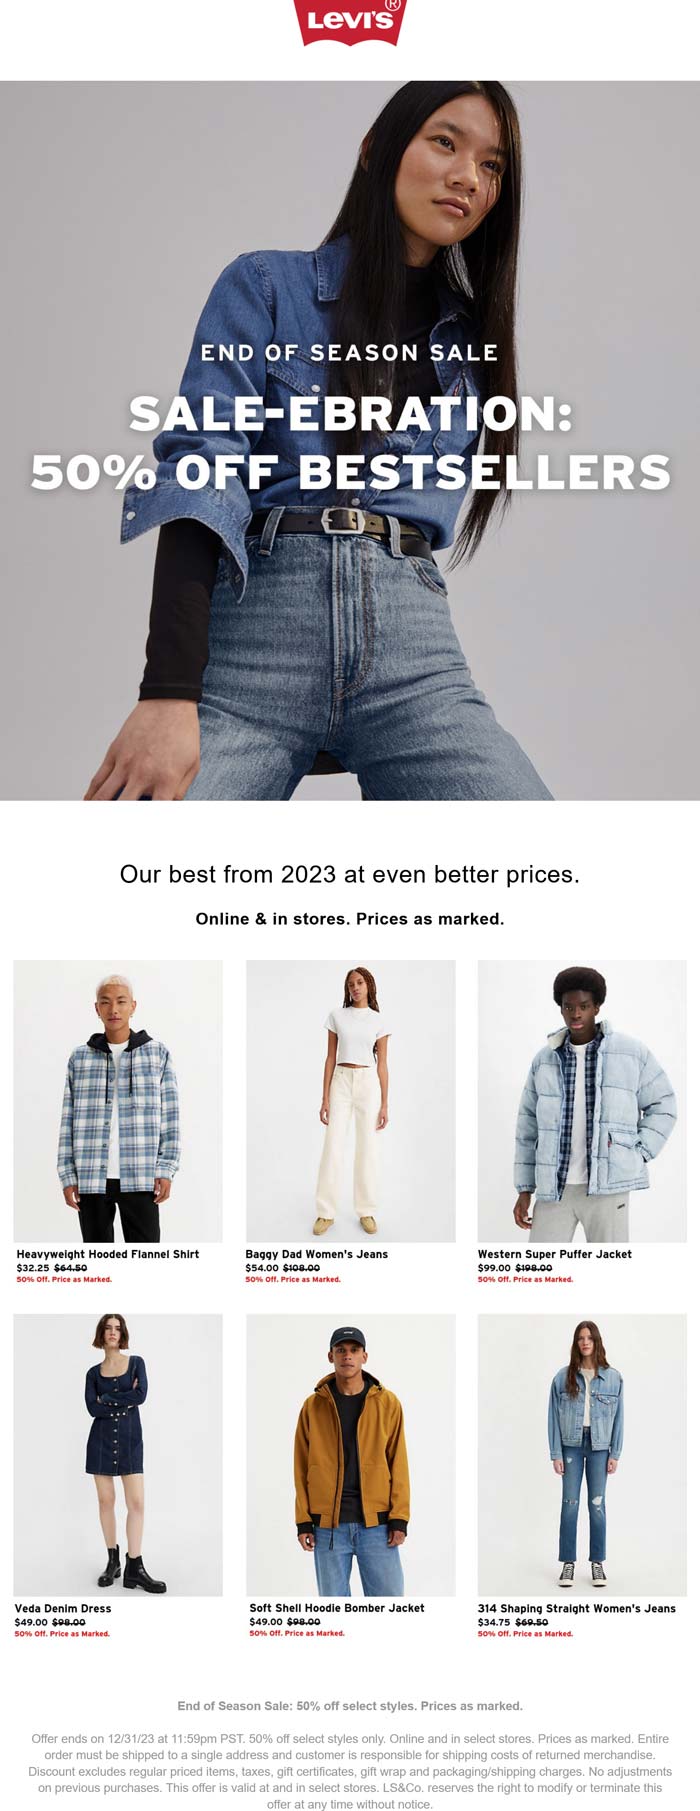 50% off bestsellers at Levis, ditto online #levis